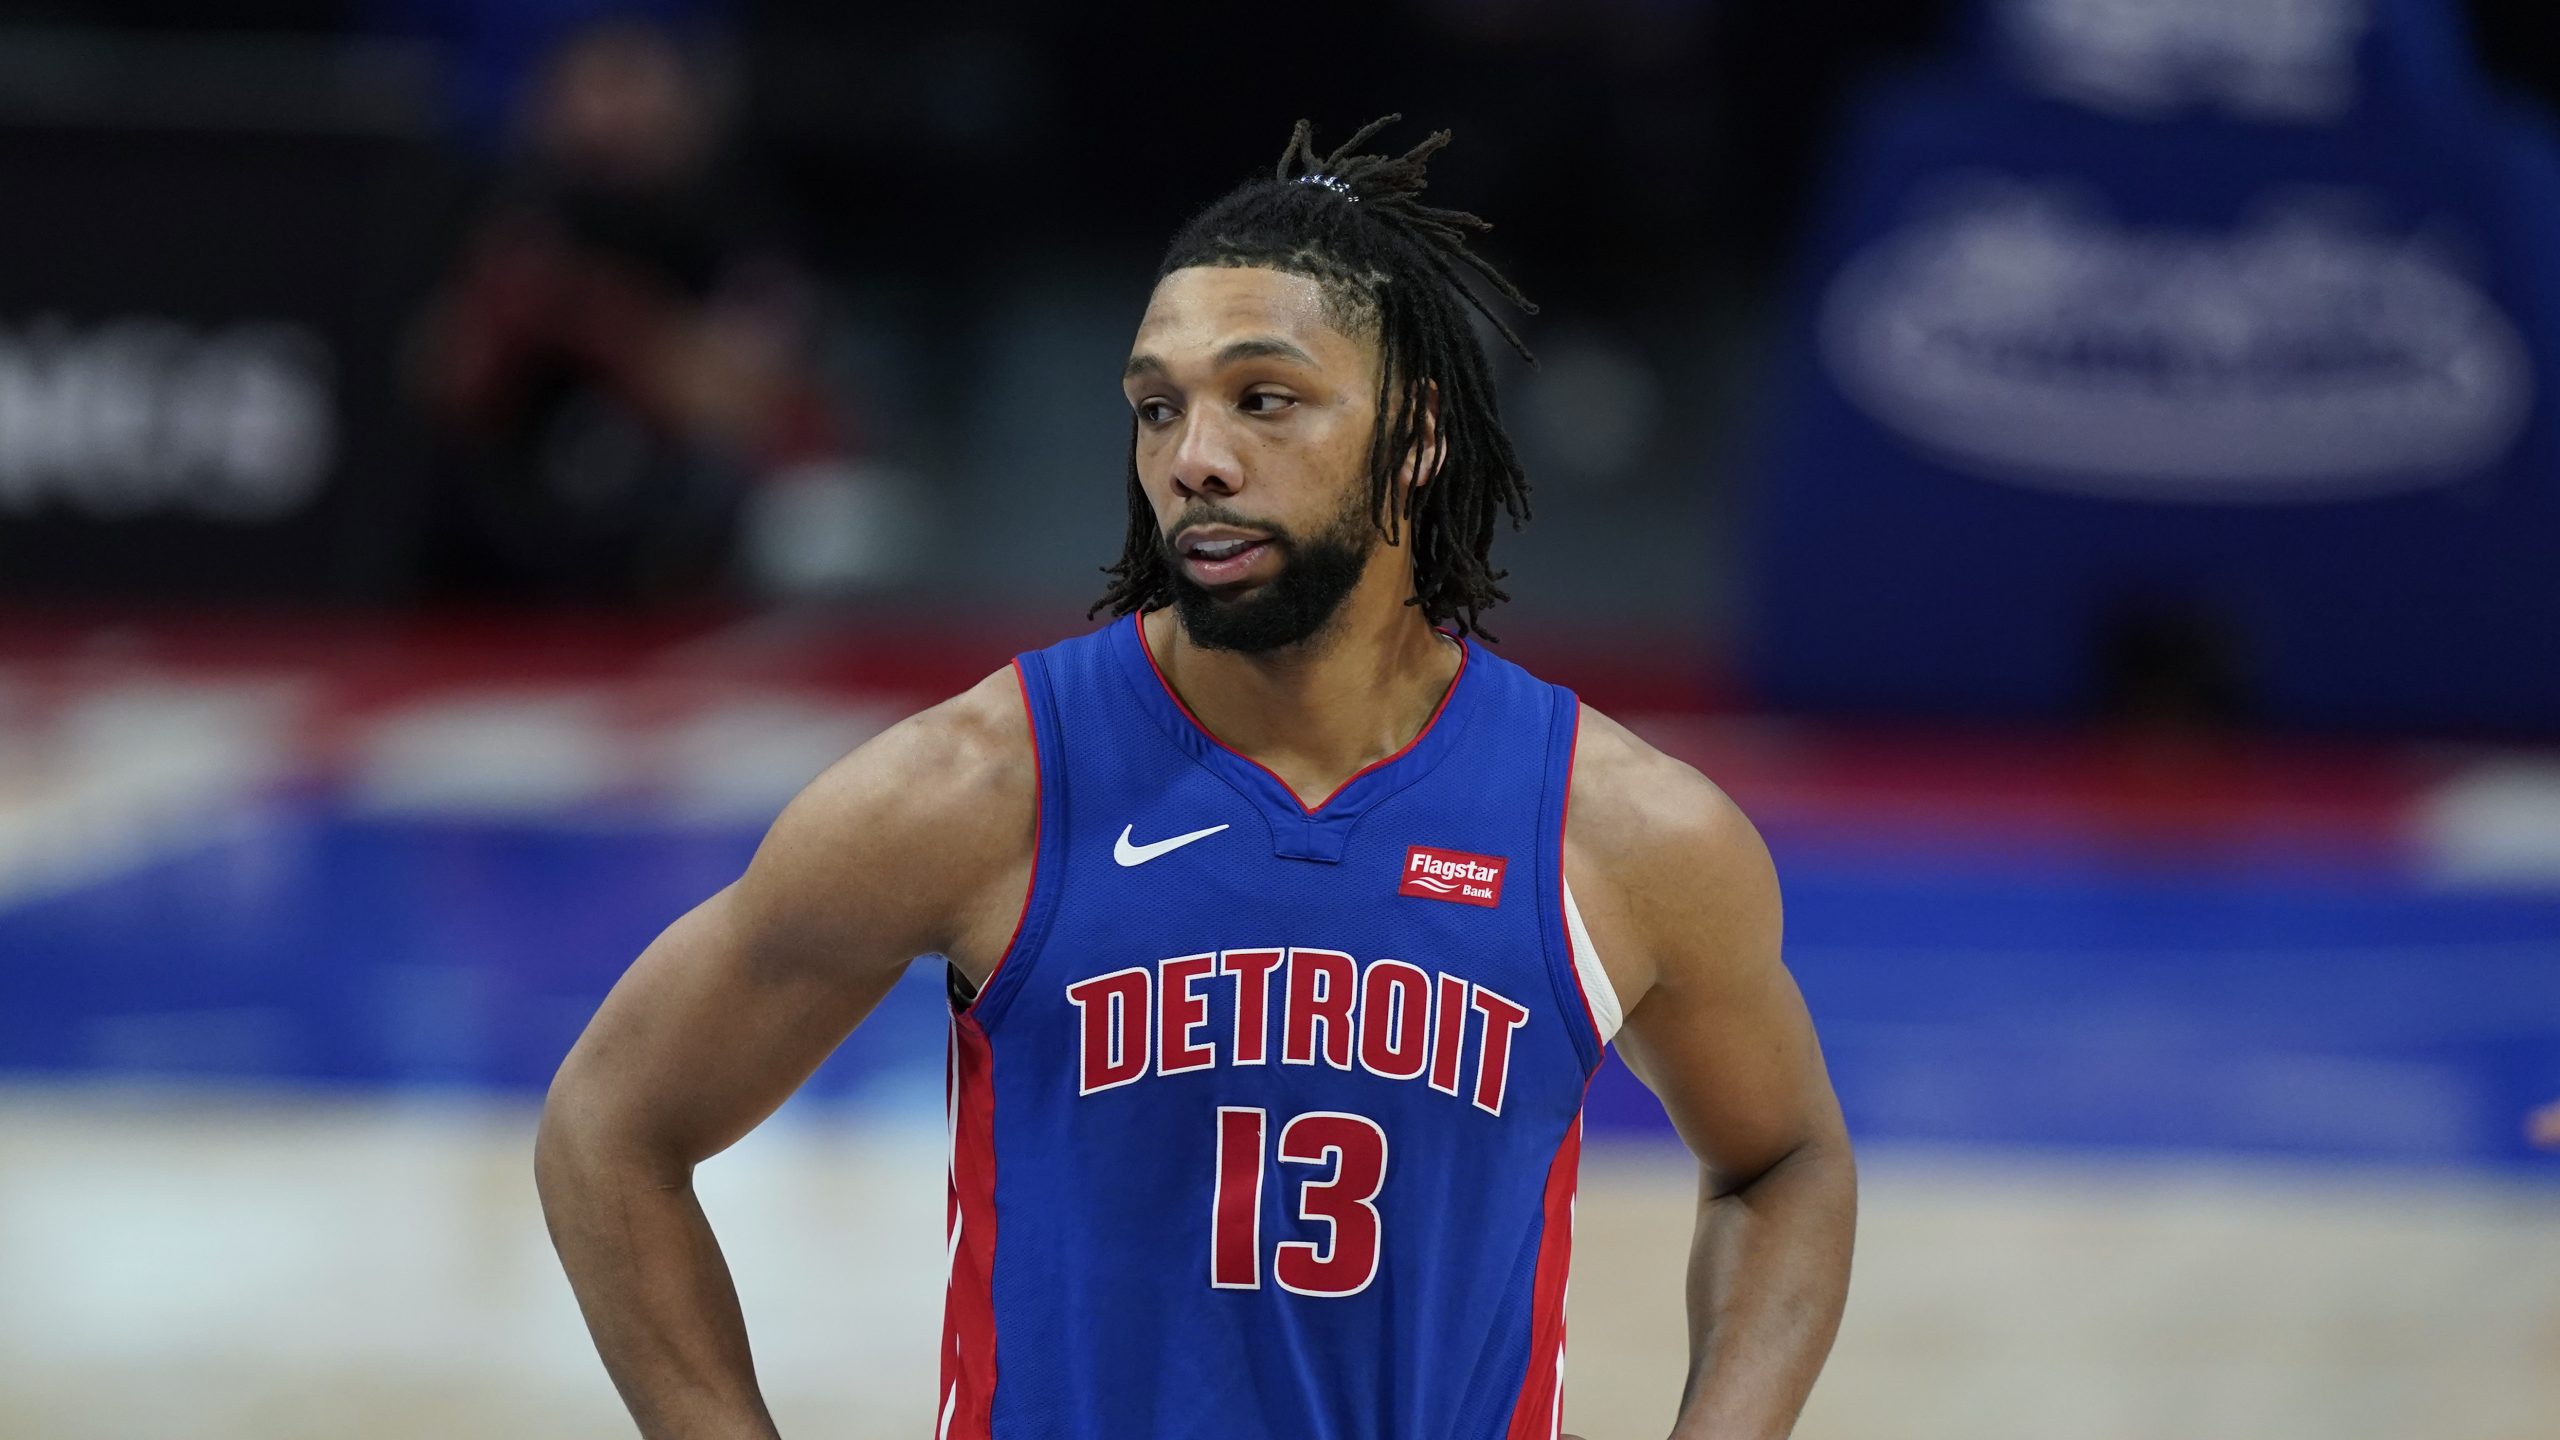 Detroit Pistons center Jahlil Okafor plays during the first half of an NBA basketball game, Sunday, May 9, 2021, in Detroit. (AP Photo/Carlos Osorio)